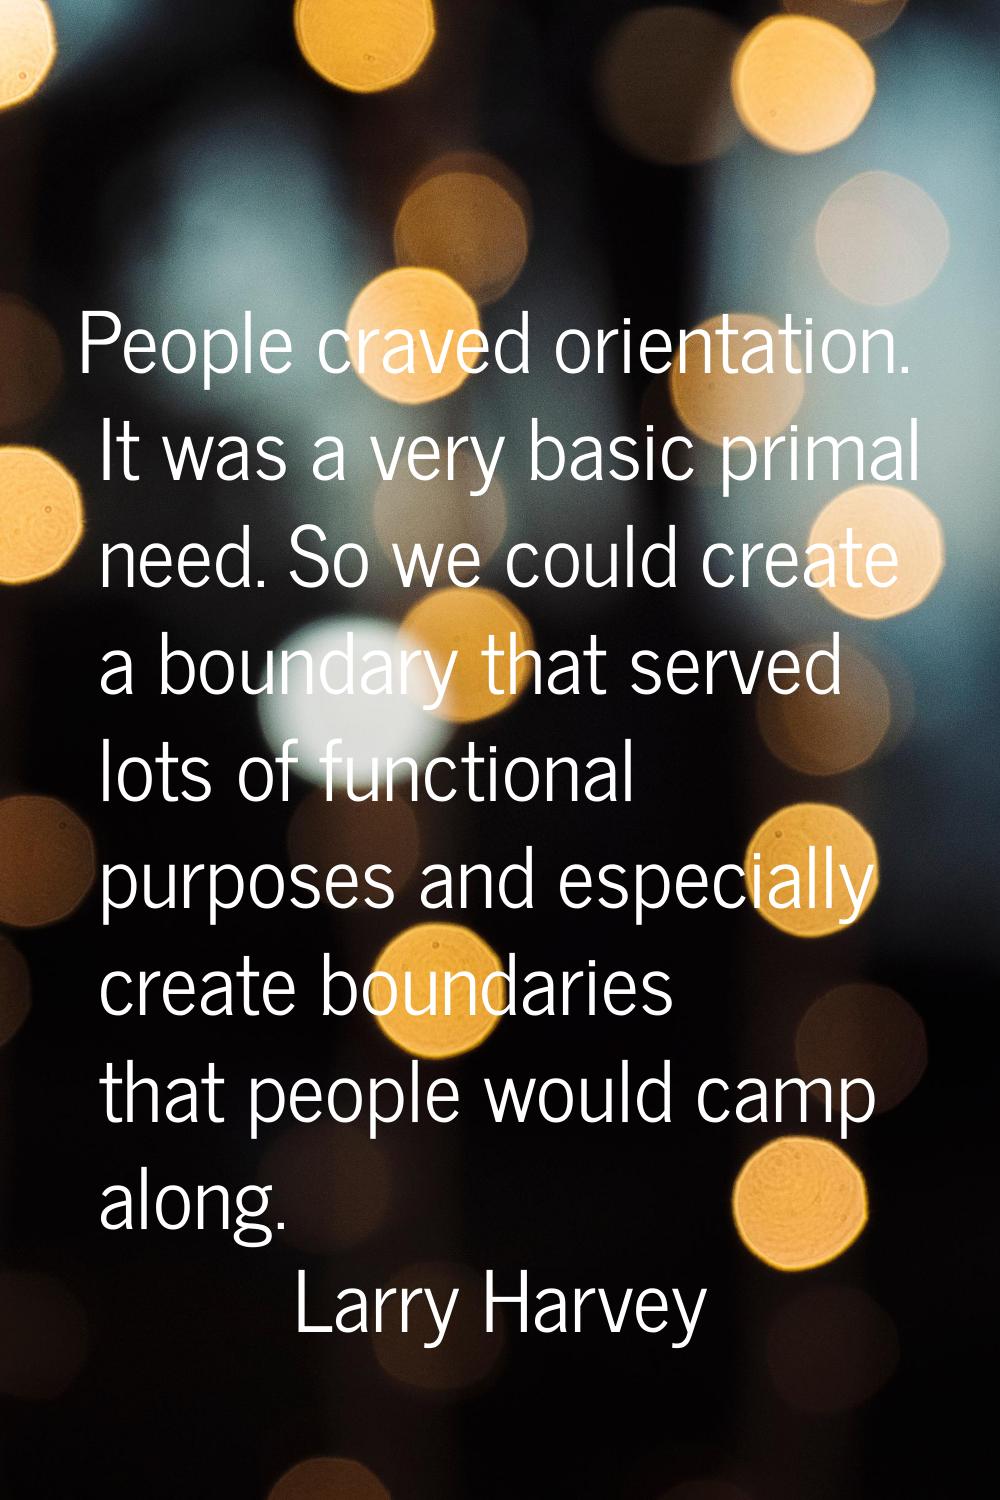 People craved orientation. It was a very basic primal need. So we could create a boundary that serv